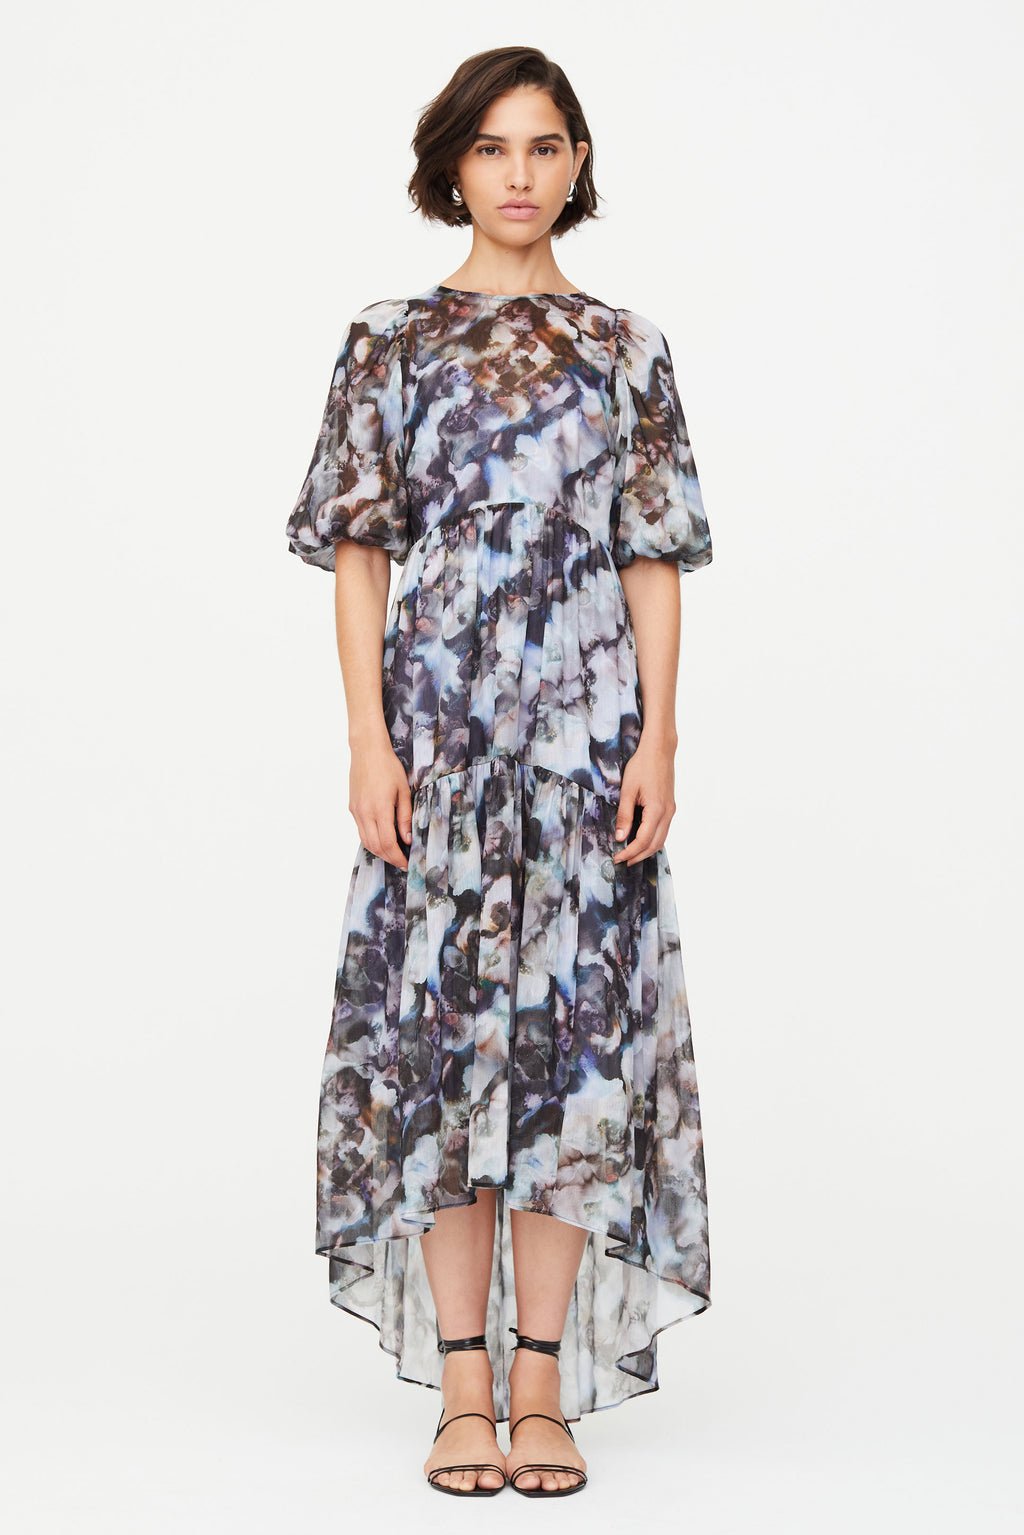 High-low hem midi length patterned dress with puffed short sleeves and slip lining 